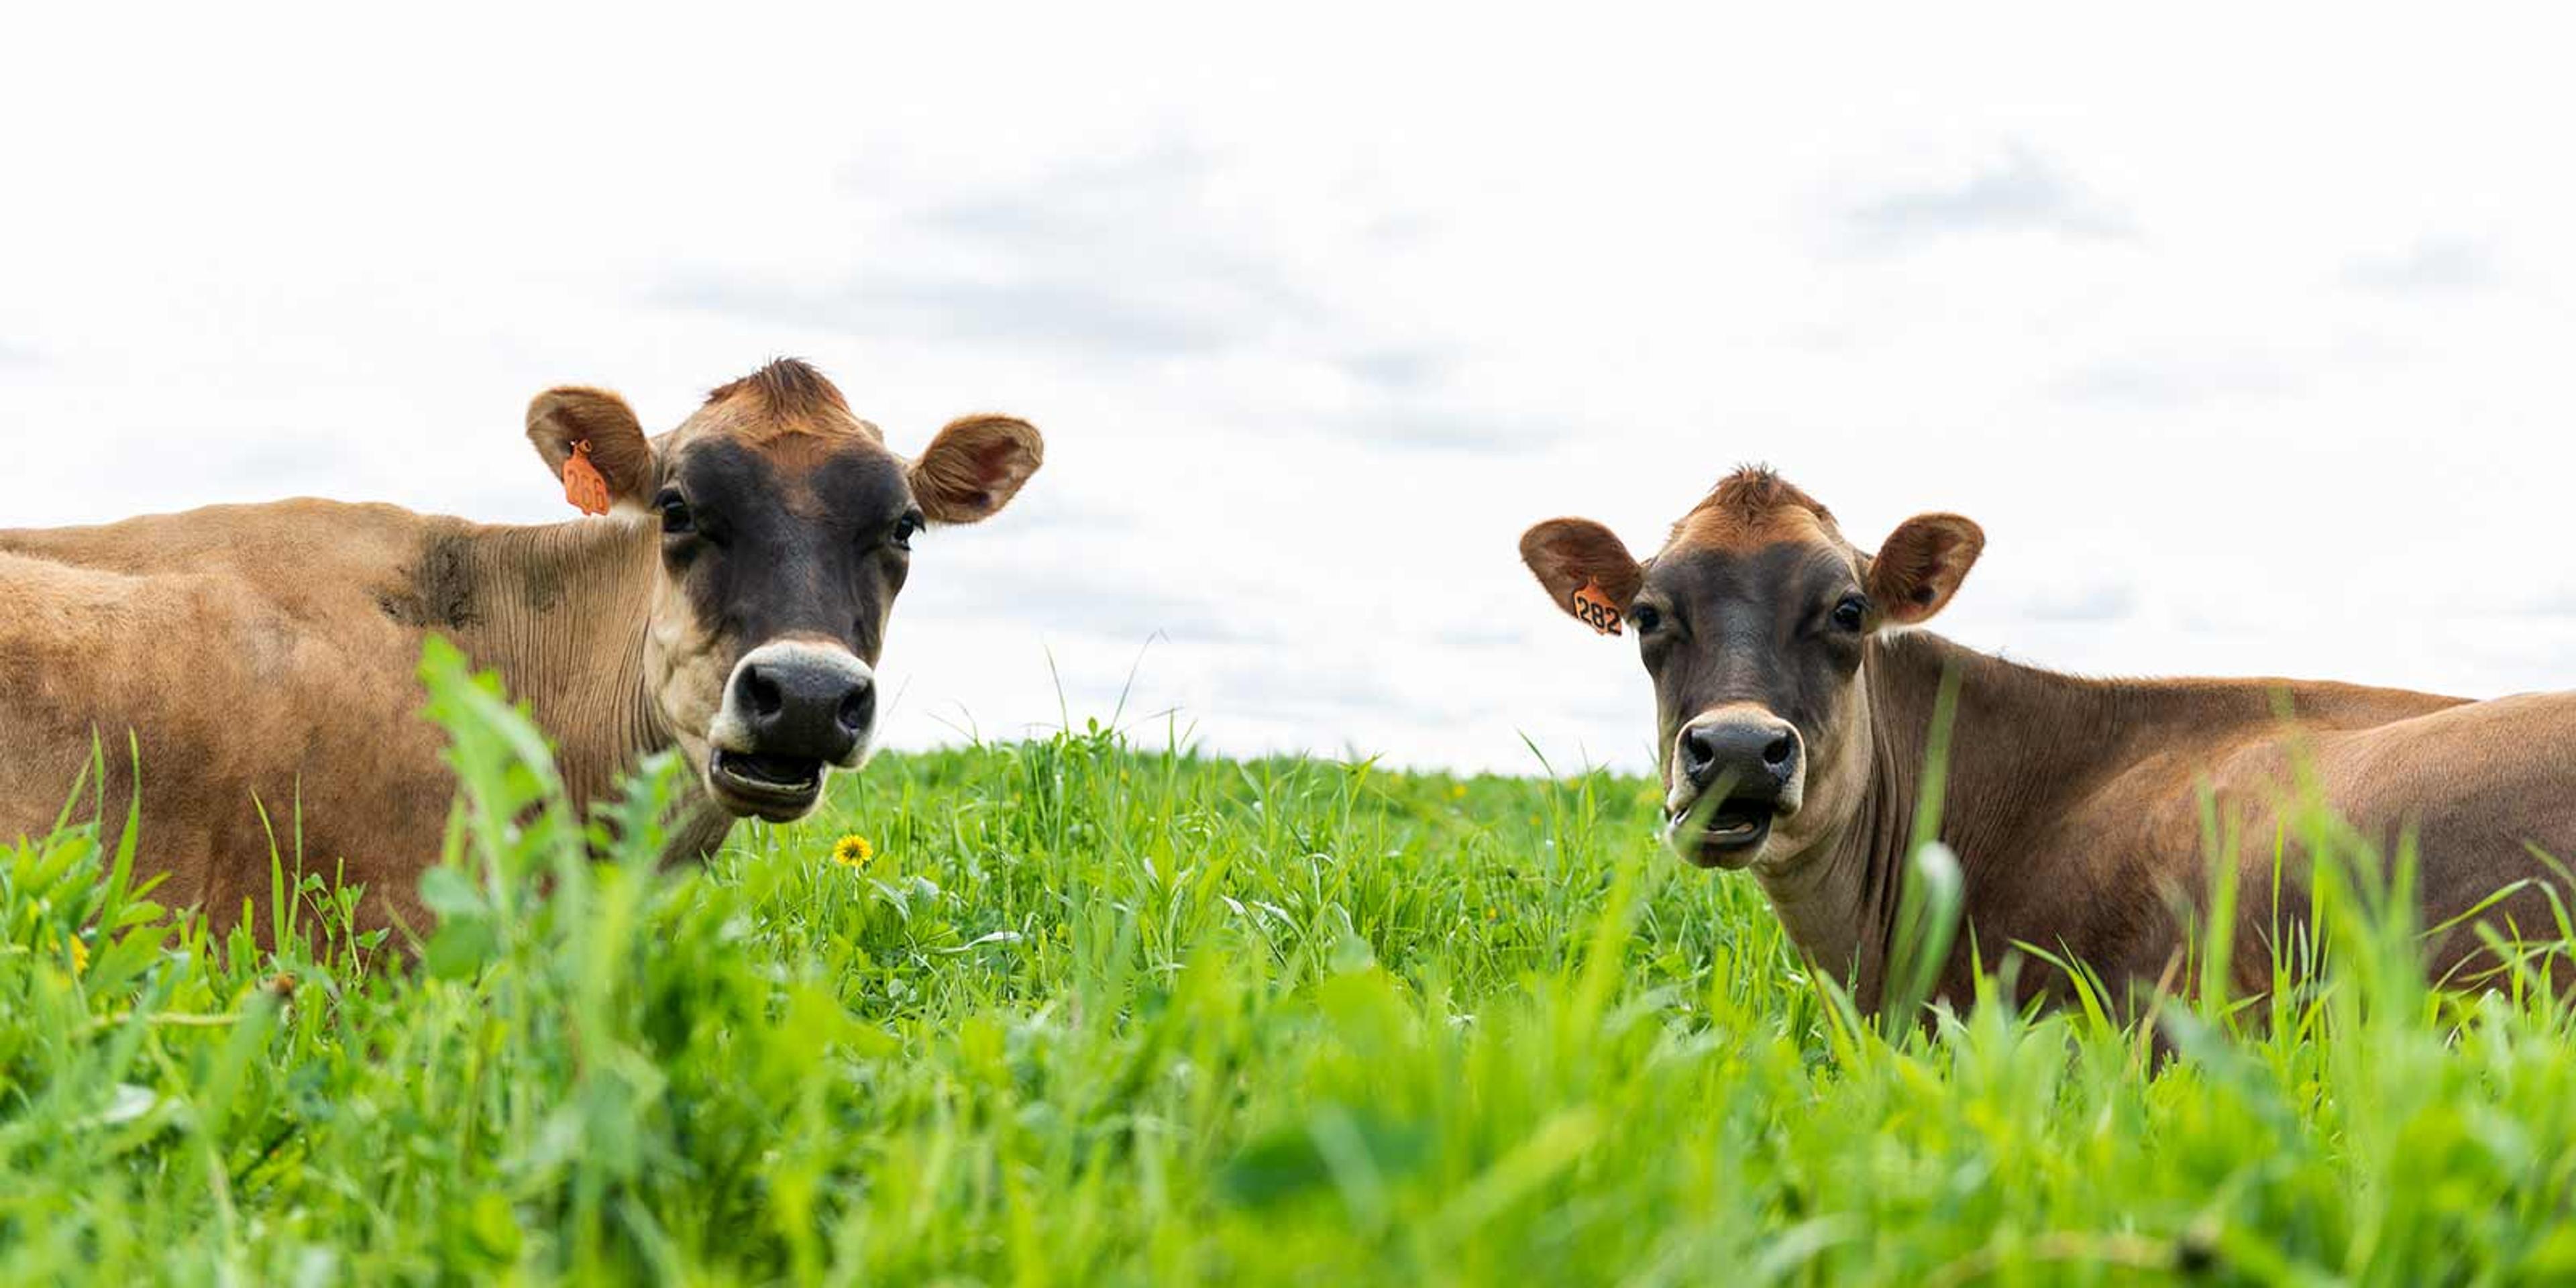 Two cows enjoy grazing on grass in the pasture.